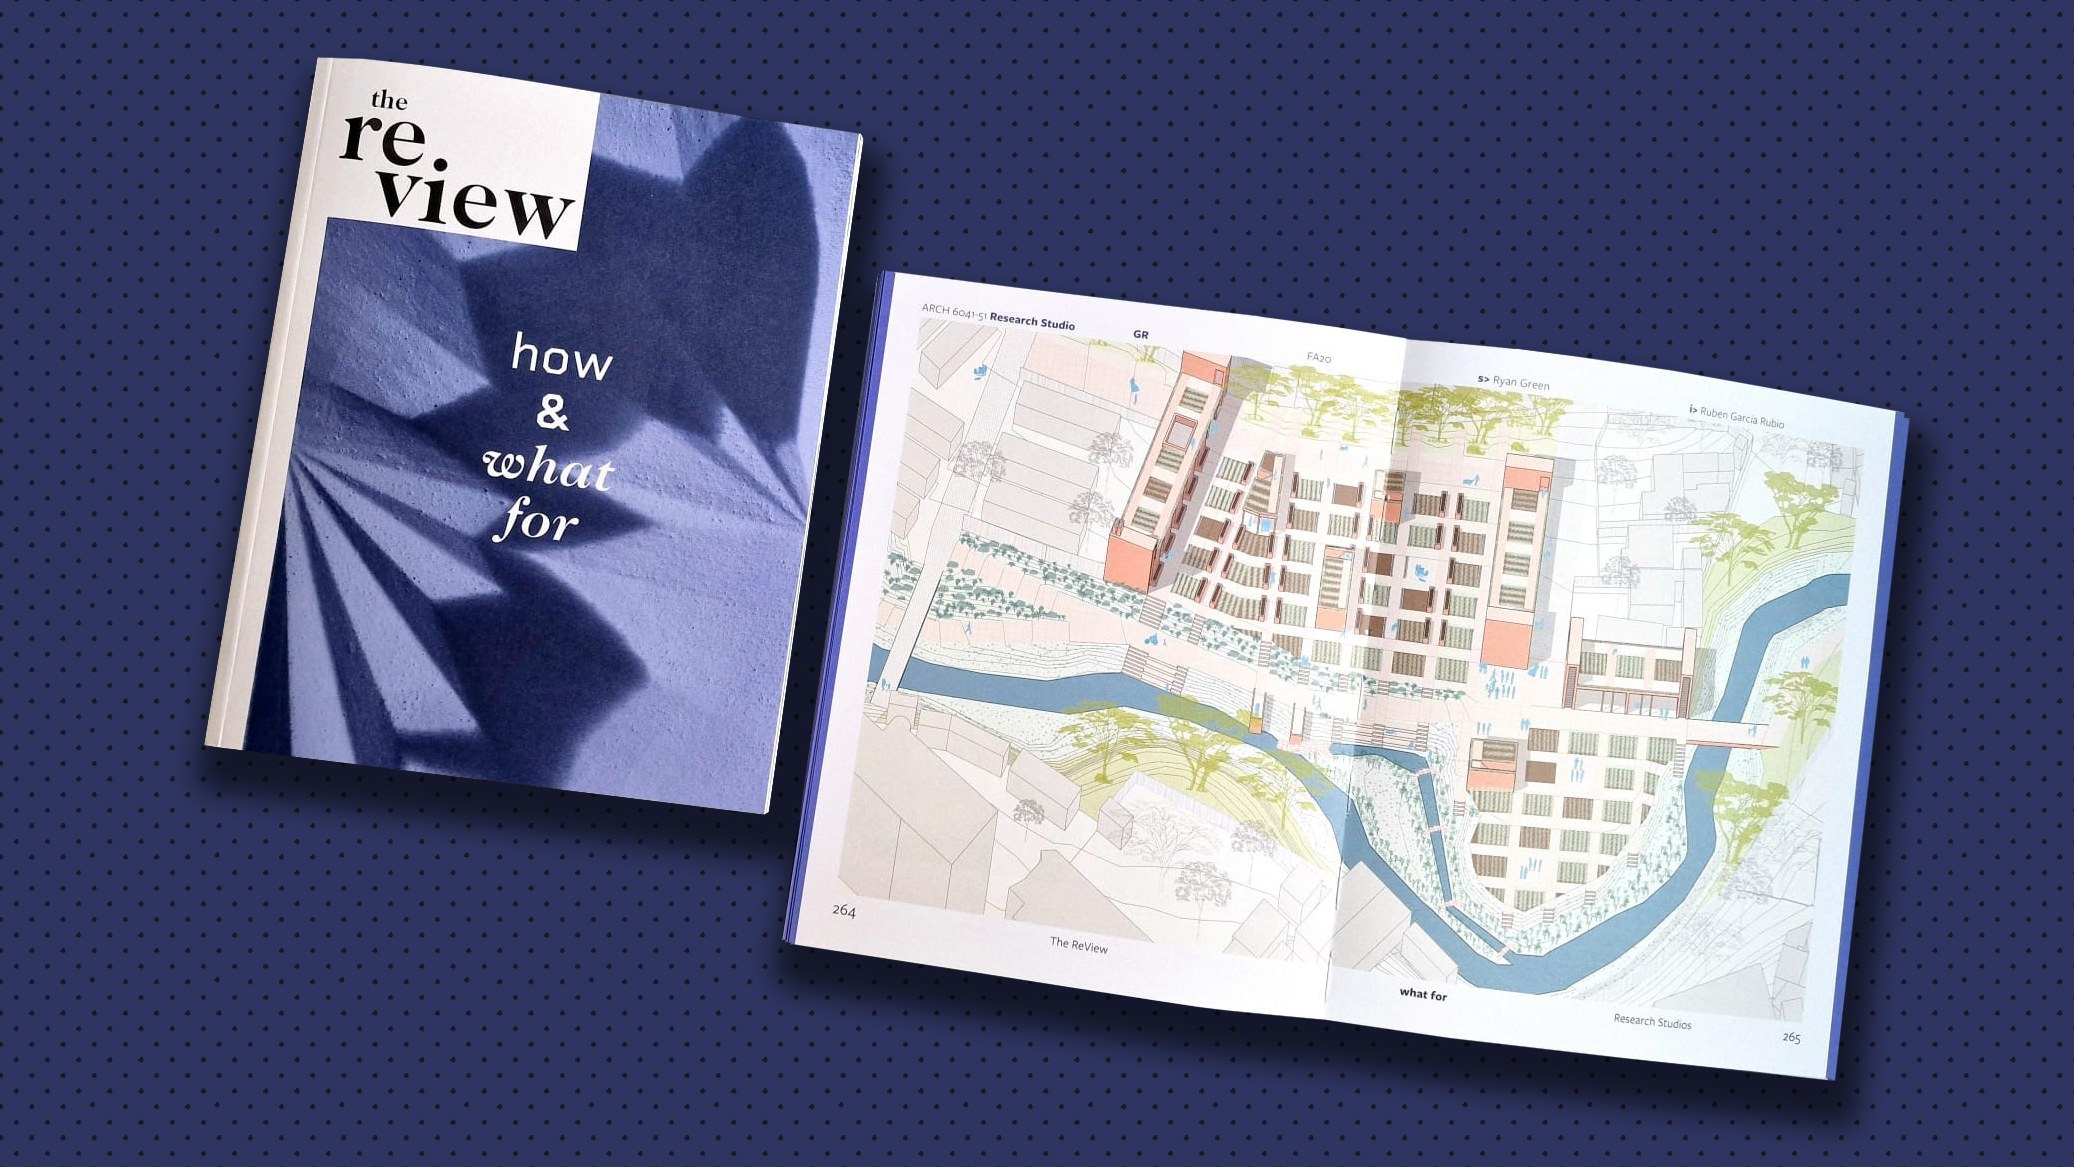 Two copies of The ReView book: left copy is closed showing the cover graphic that says "the review, how & what for"; the right copy is open to a full-page spread of a urban plan drawing showing a curved river, bridges and grid of developed and open land.